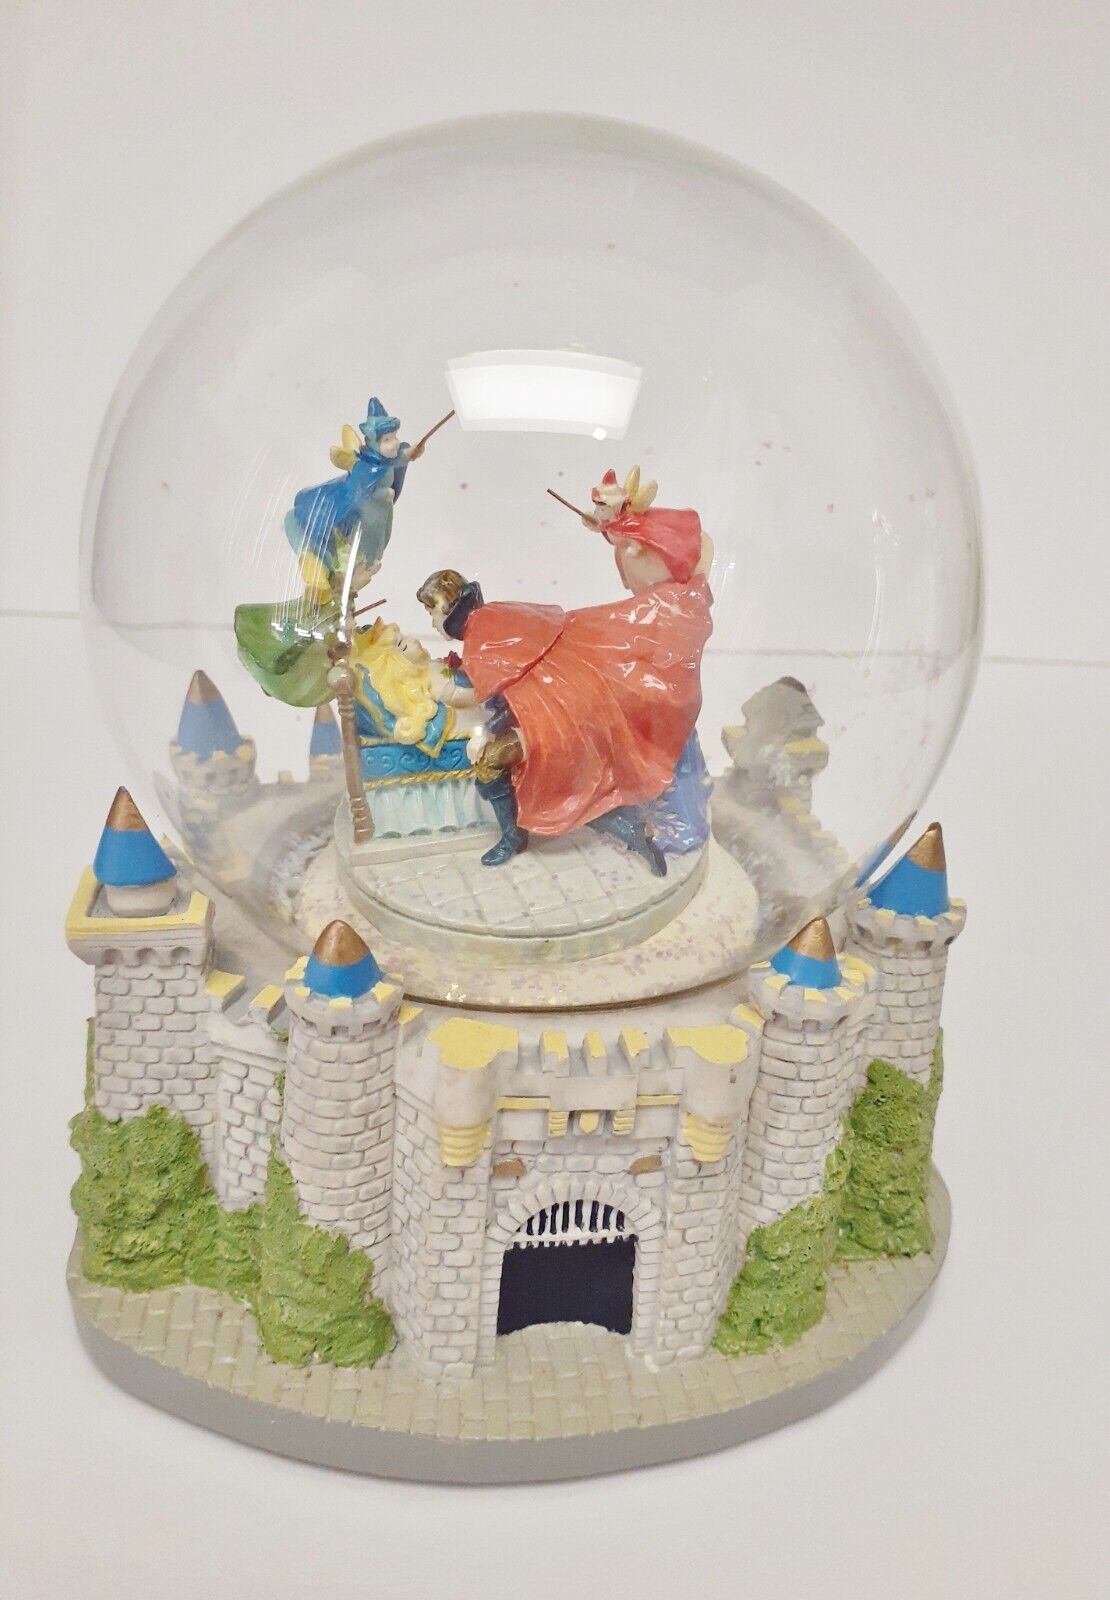 Primary image for VTG Disney Sleeping Beauty Musical Snow Globe Once Upon a Dream DISTRESSED RARE